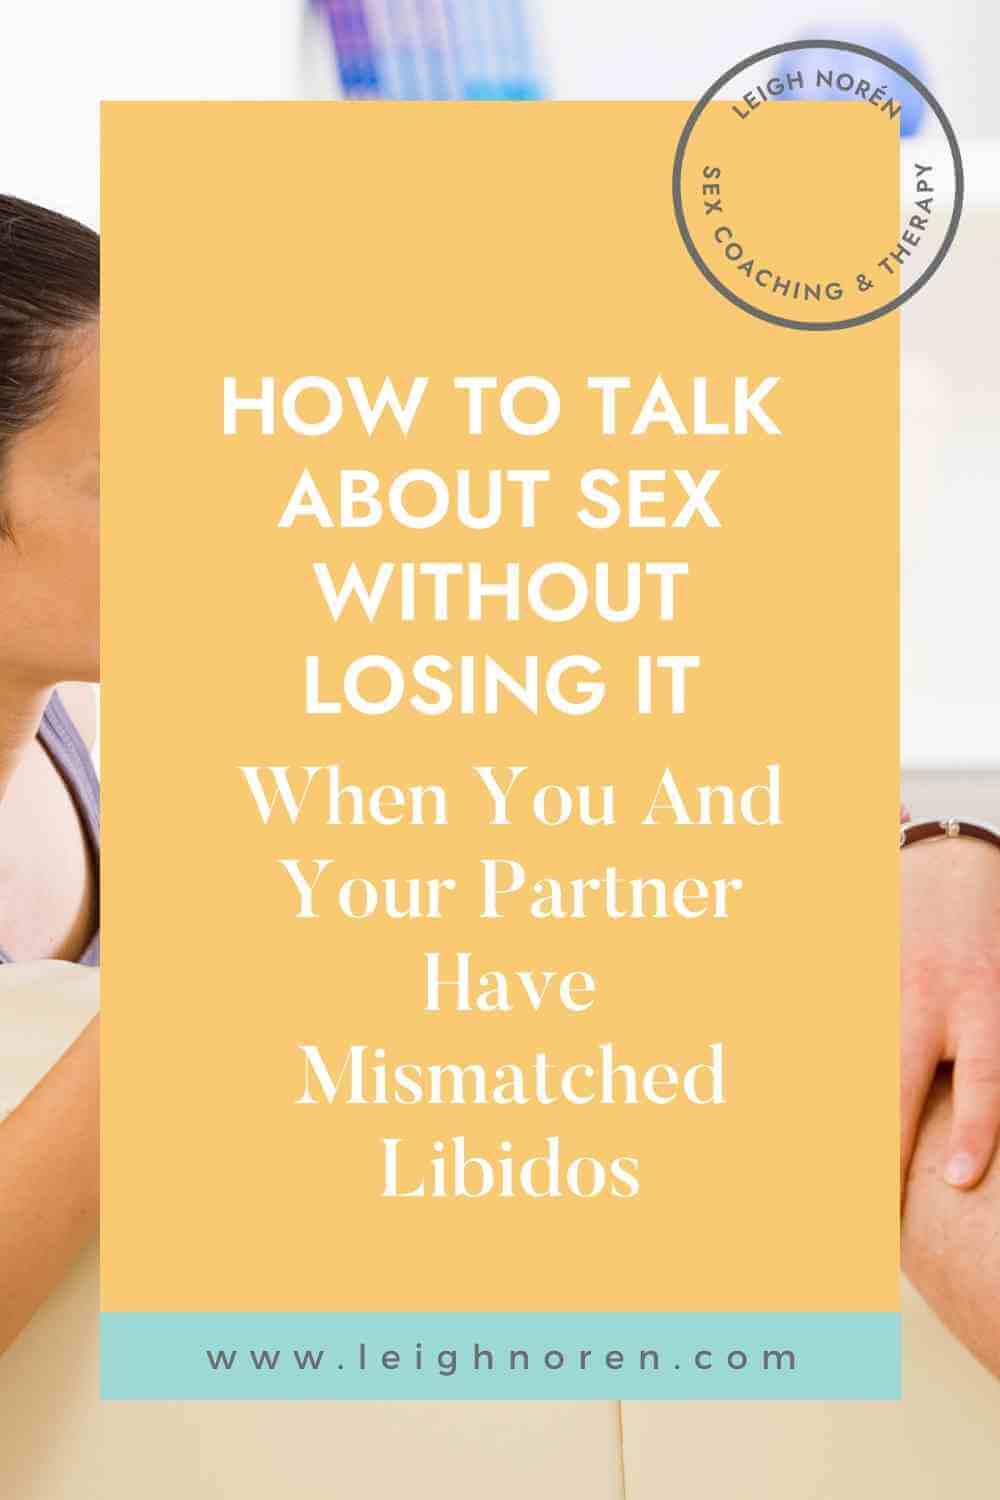 How To Talk About Sex Without Losing It When You And Your Partner Have Mismatched Libidos